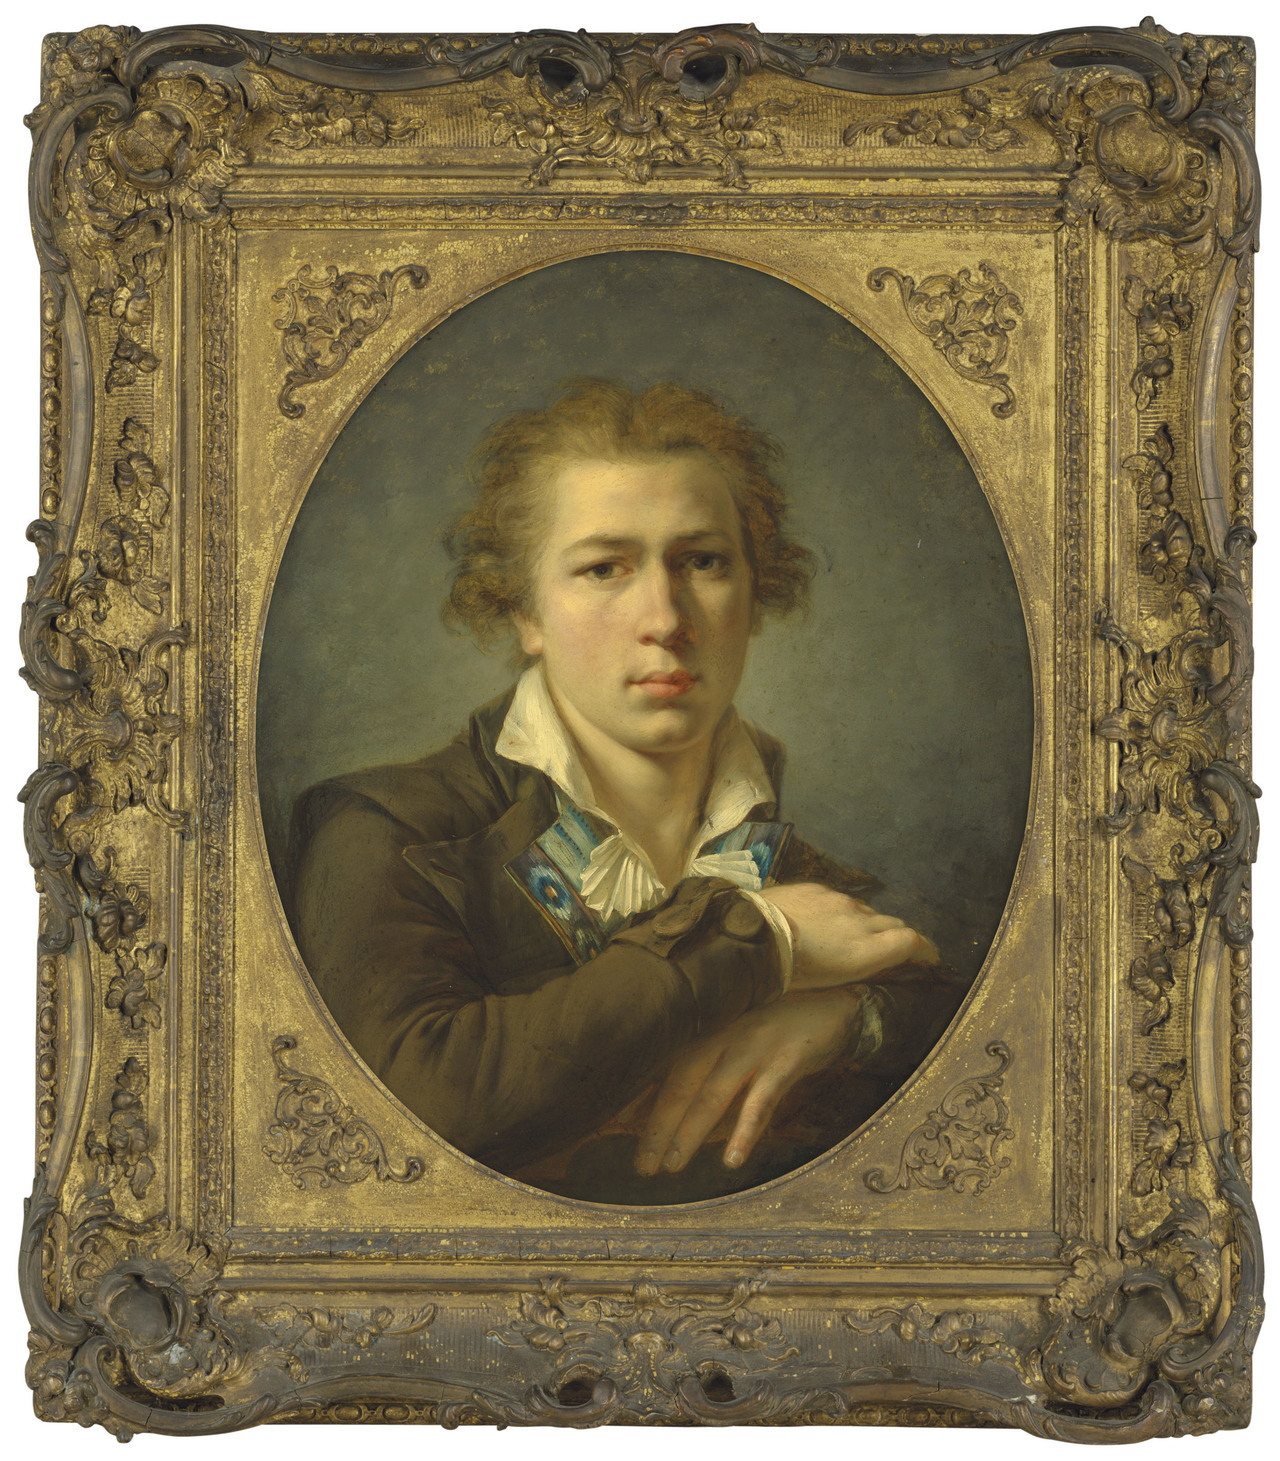 Circle of Henri Pierre Danloux (1753-1809), â€˜Portrait of a young gentleman in an embroidered jacketâ€™, oil on paper laid on canvas then panel, 1700s, French, for sale est. 12,000-18,000 GBP in Christieâ€™s Old Masters Day sale, July 2019